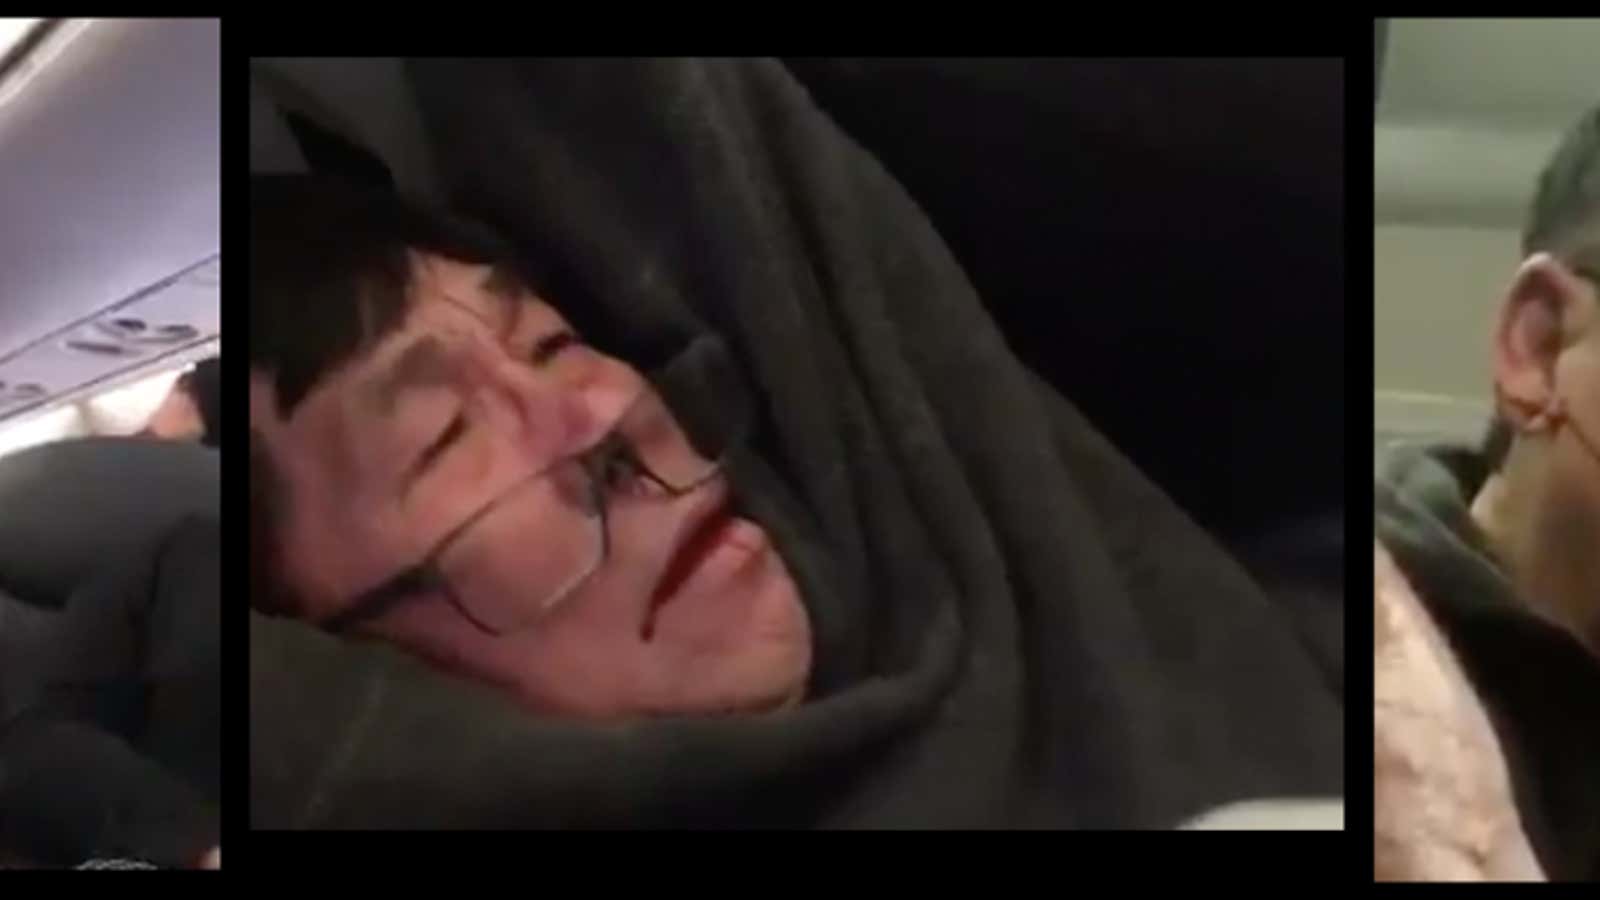 Dr. David Dao was forcibly removed from a United Airlines flight on April 10. (Screencaps from Twitter users Tyler_Bridges, JayseDavid, and kaylyn_davis)